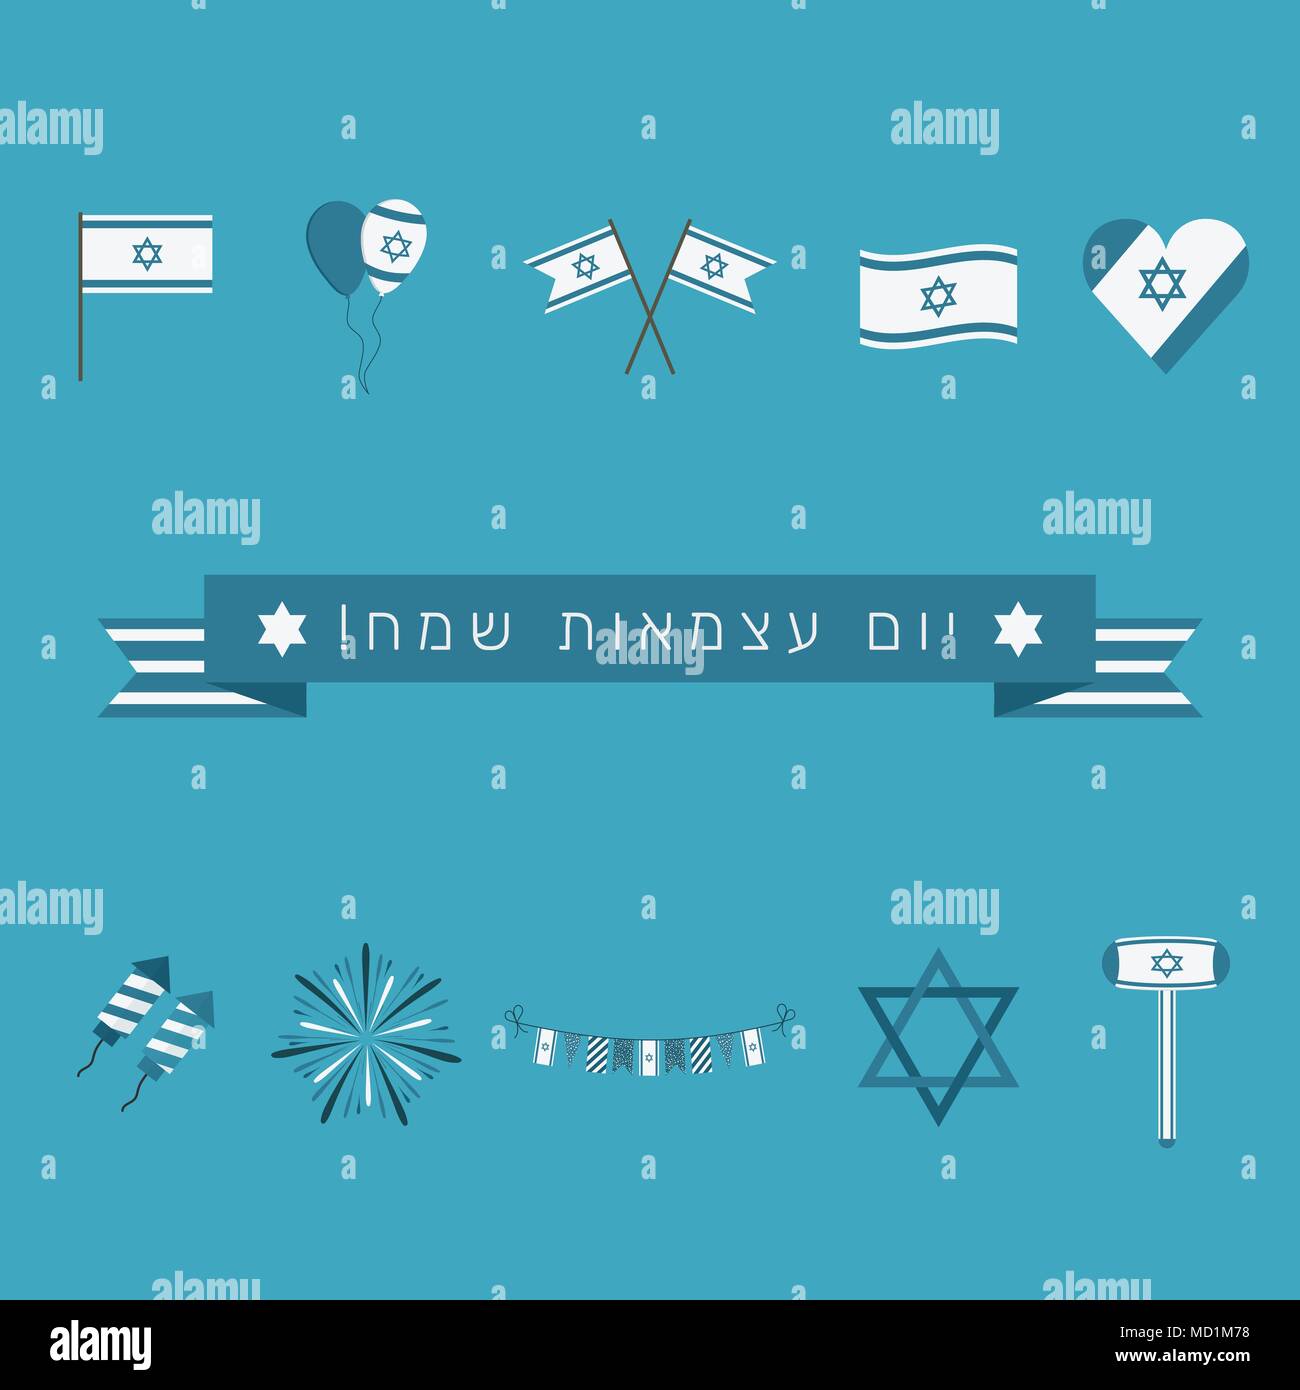 Israel Independence Day holiday flat design icons set with text in hebrew "Yom Atzmaut Sameach" meaning "Happy Independence Day". Stock Vector